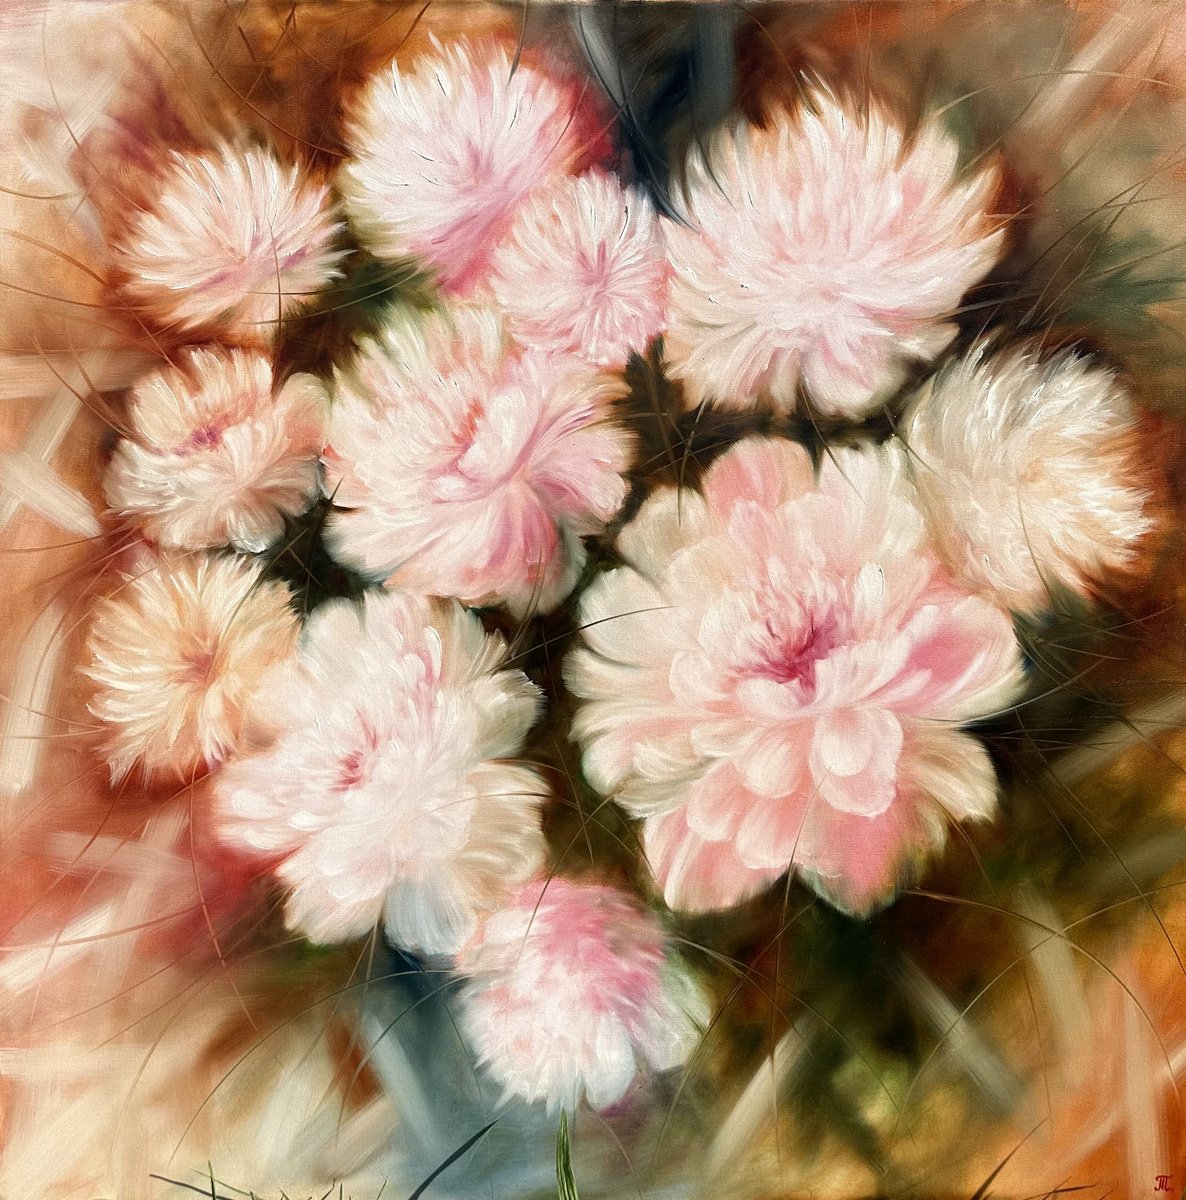 Celestial Peonies by Tanja Frost